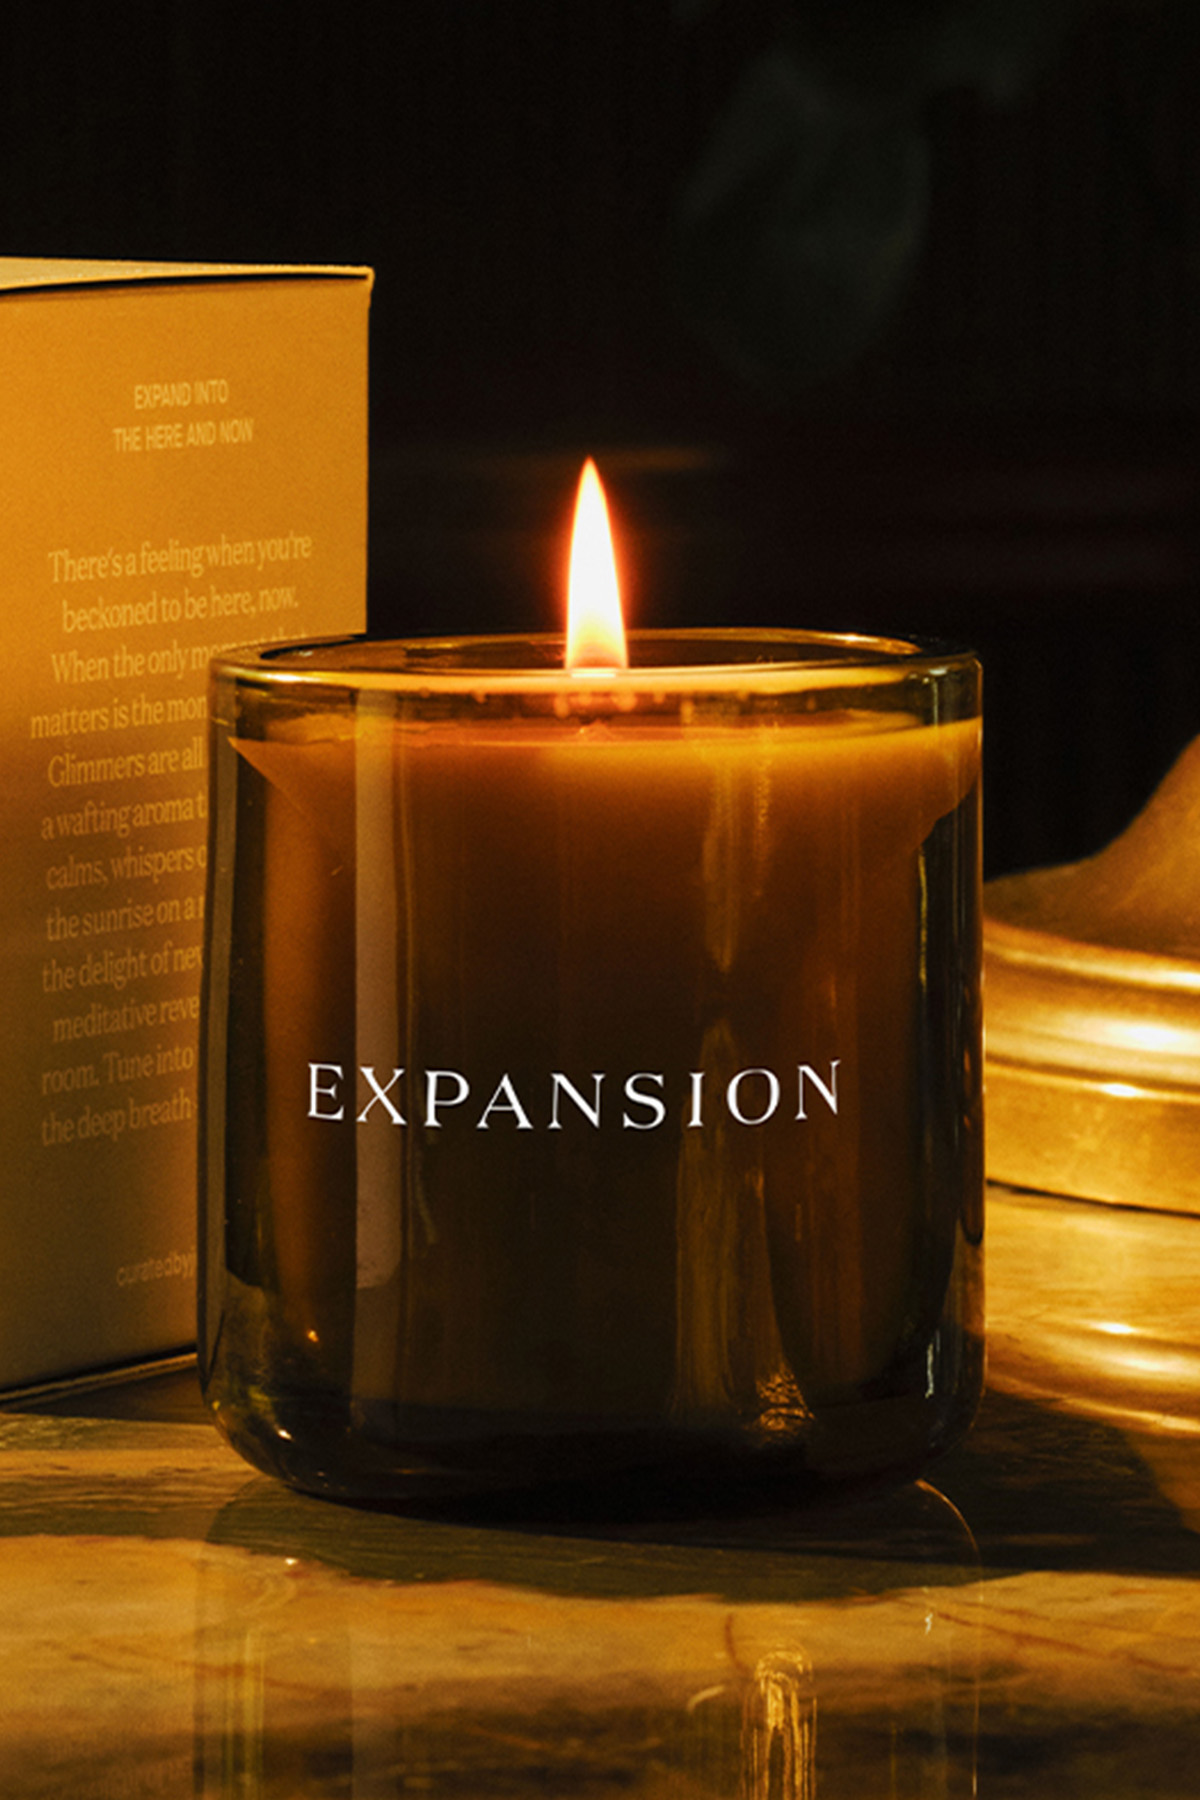 JW Marriott, Expansion Candle